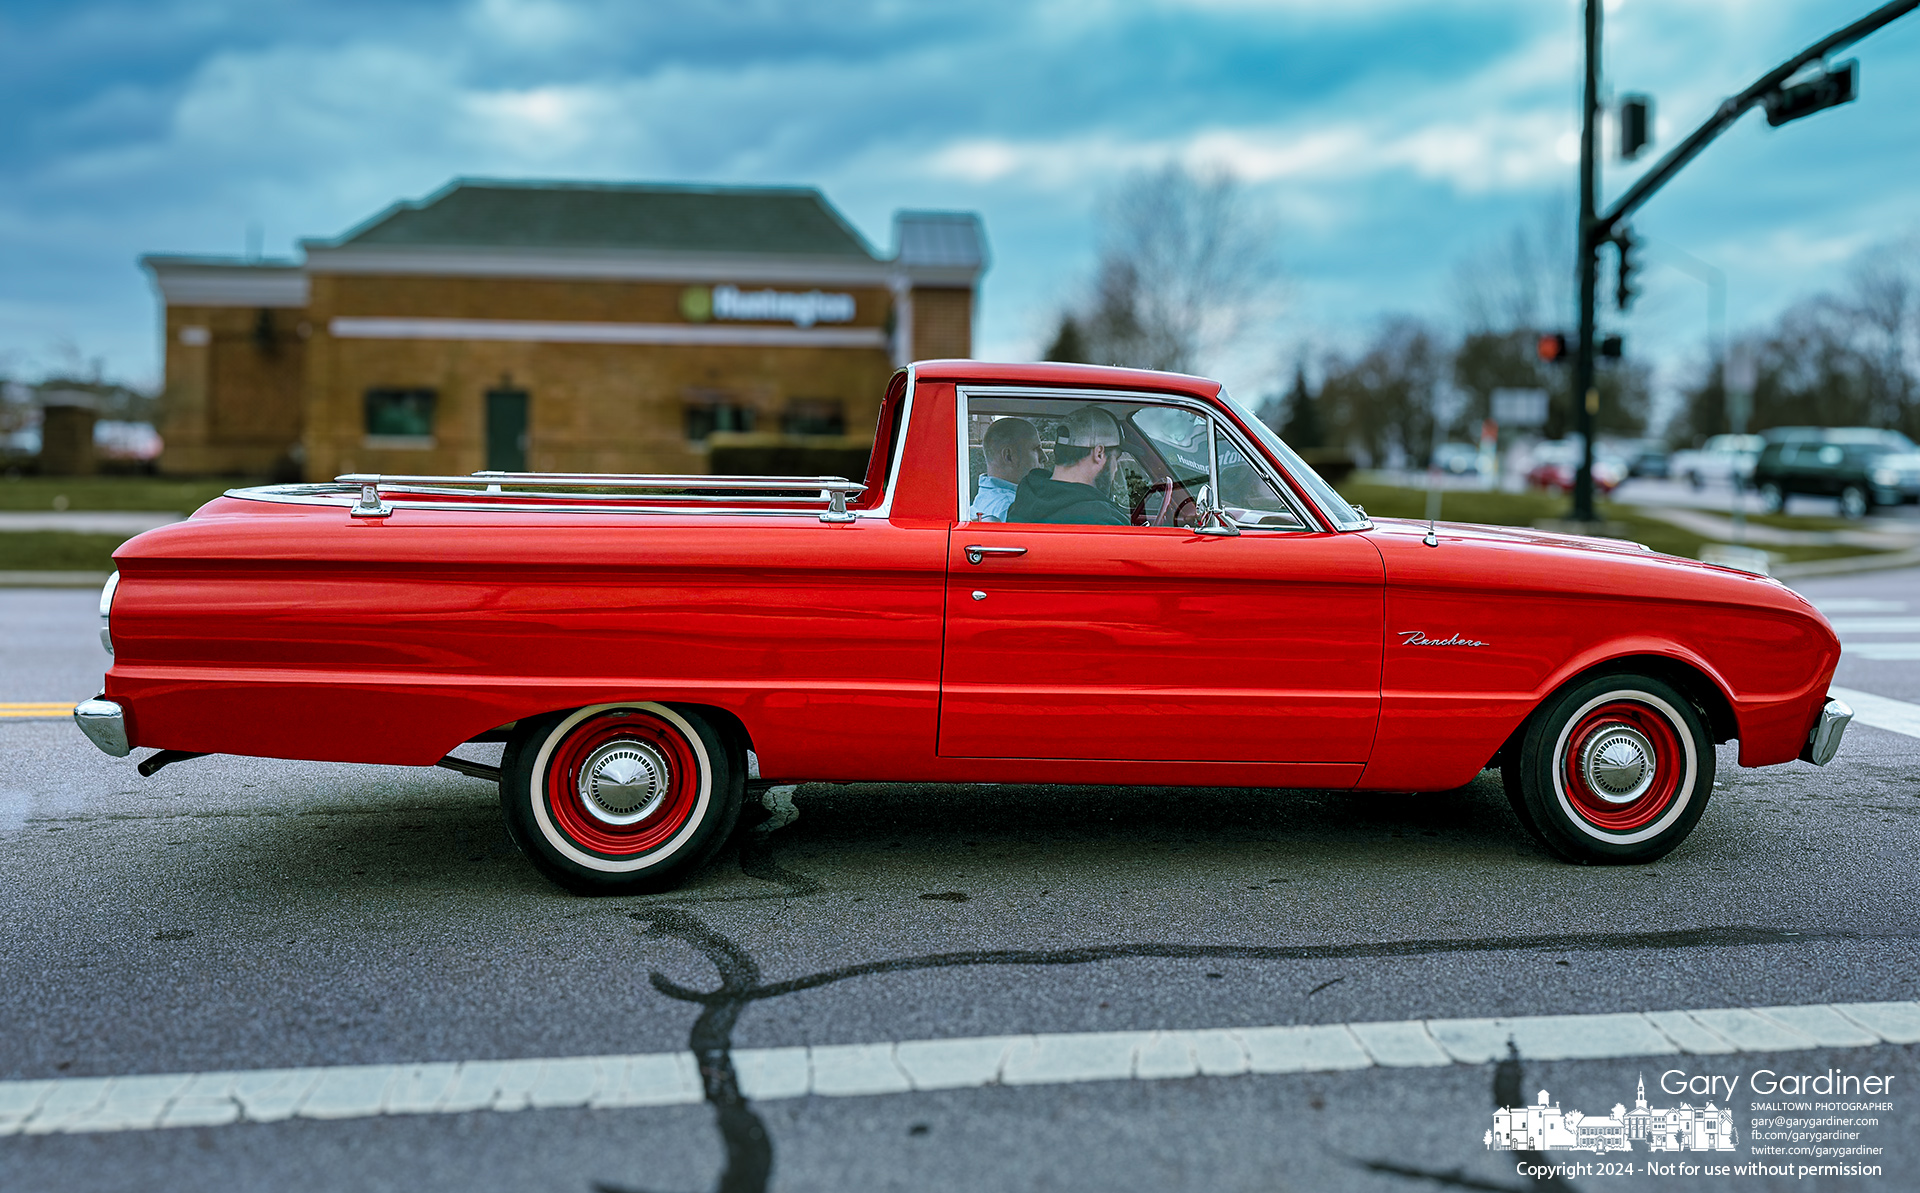 A bright red early 1960s Ford Falcon Ranchero waits at the signal light to turn onto State Street from Maxtown during a midafternoon trip. My Final Photo for March 27, 2024.